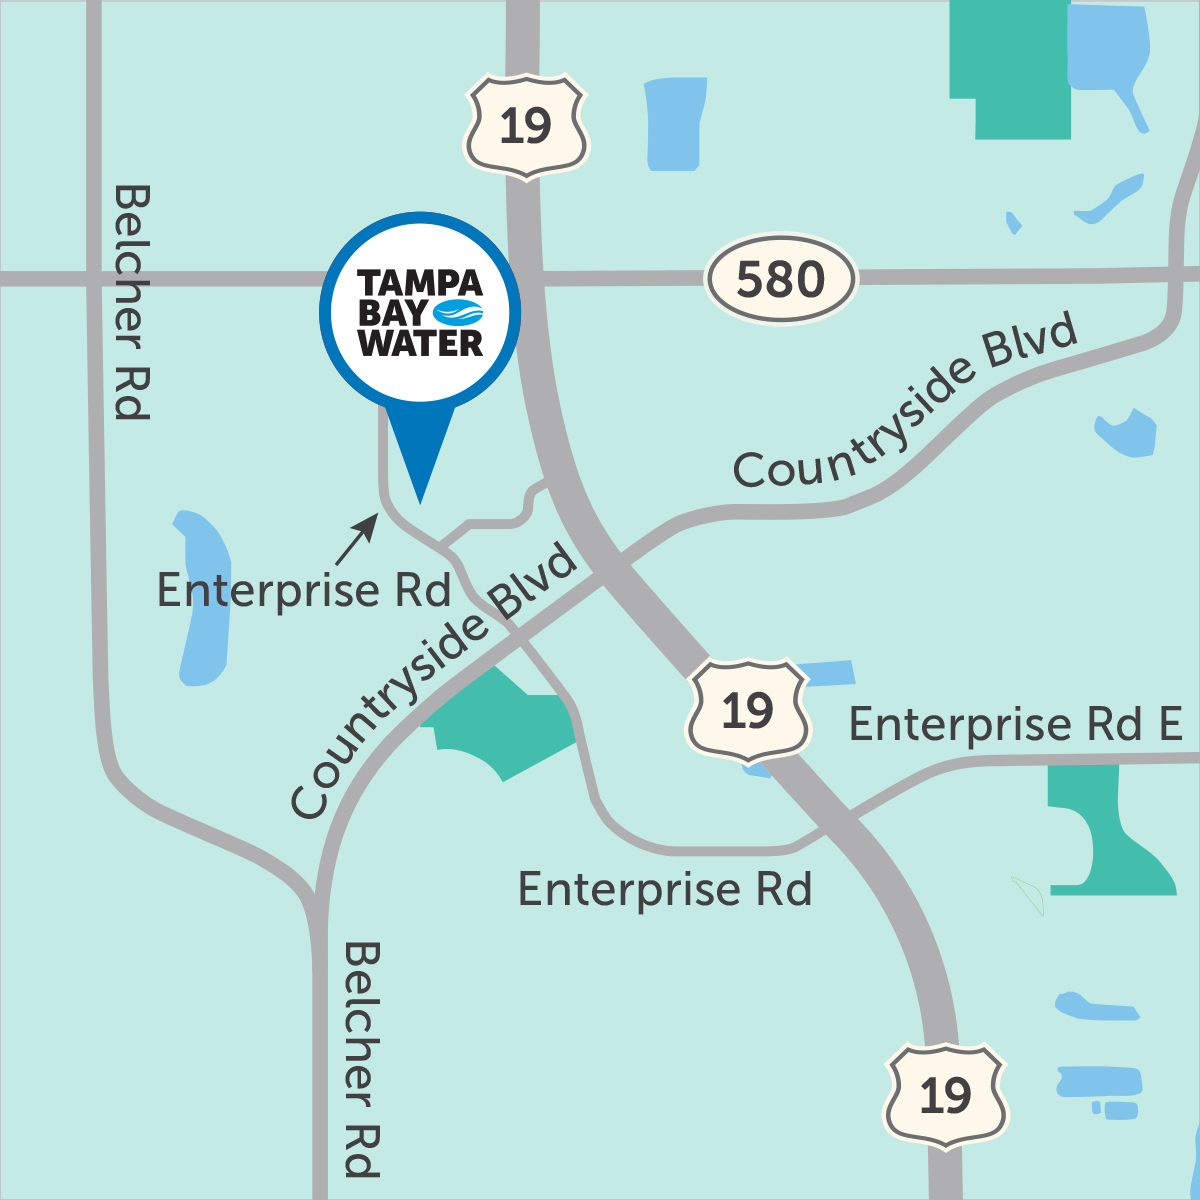 Tampa Bay Water's Administration Offices are located at 2575 Enterprise Road, Clearwater, FL 33763